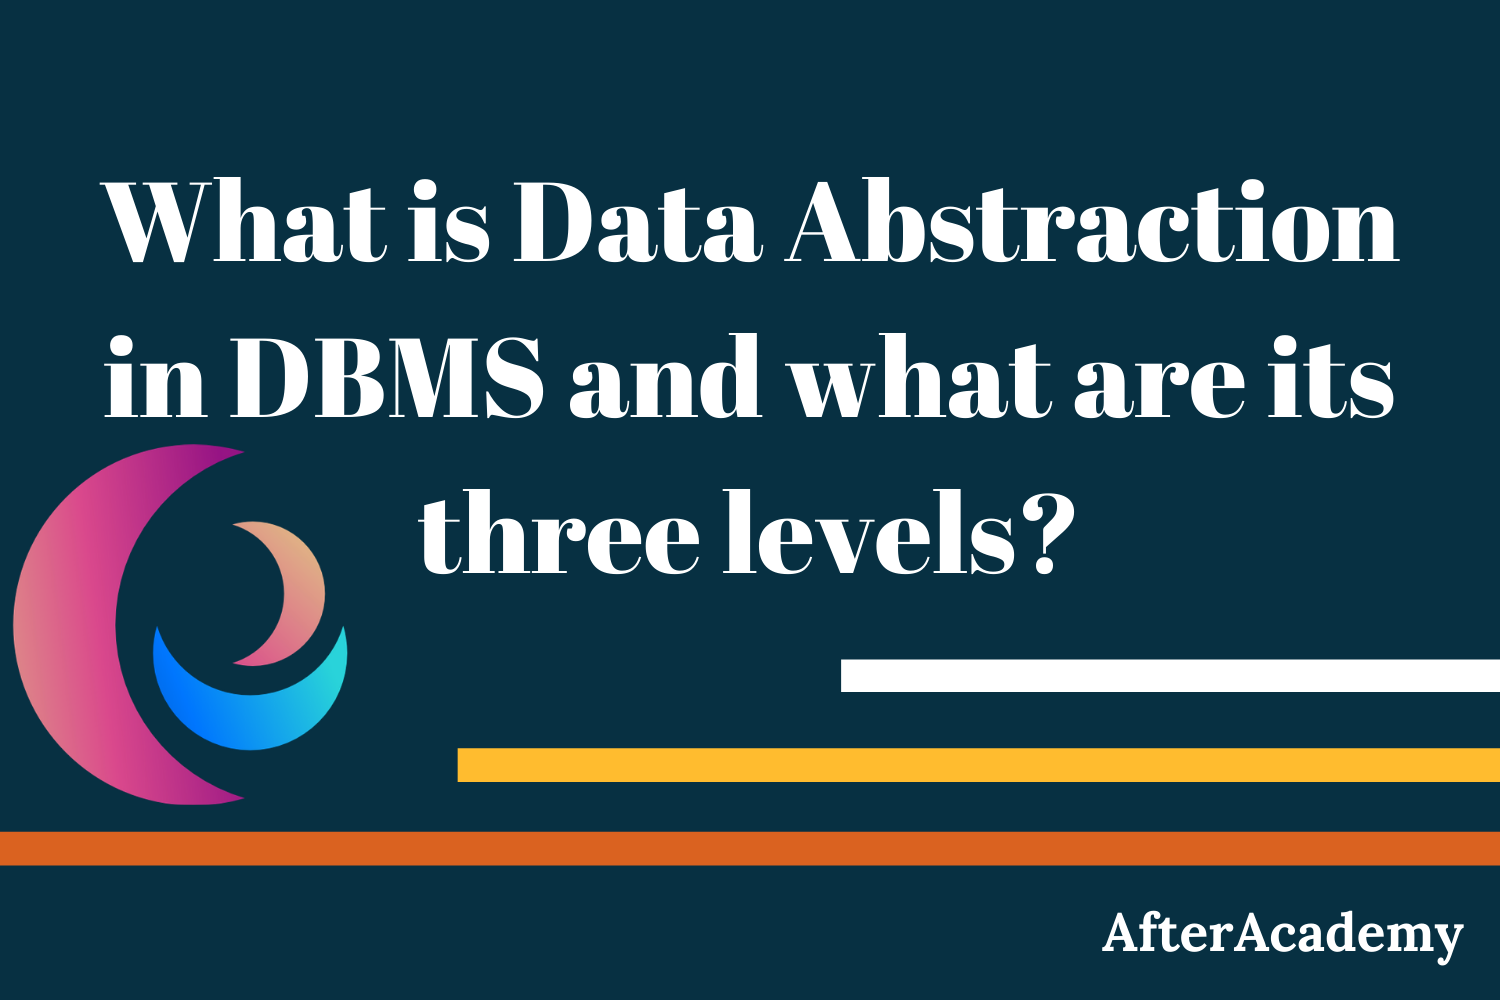 What is Data Abstraction in DBMS and what are its three levels?